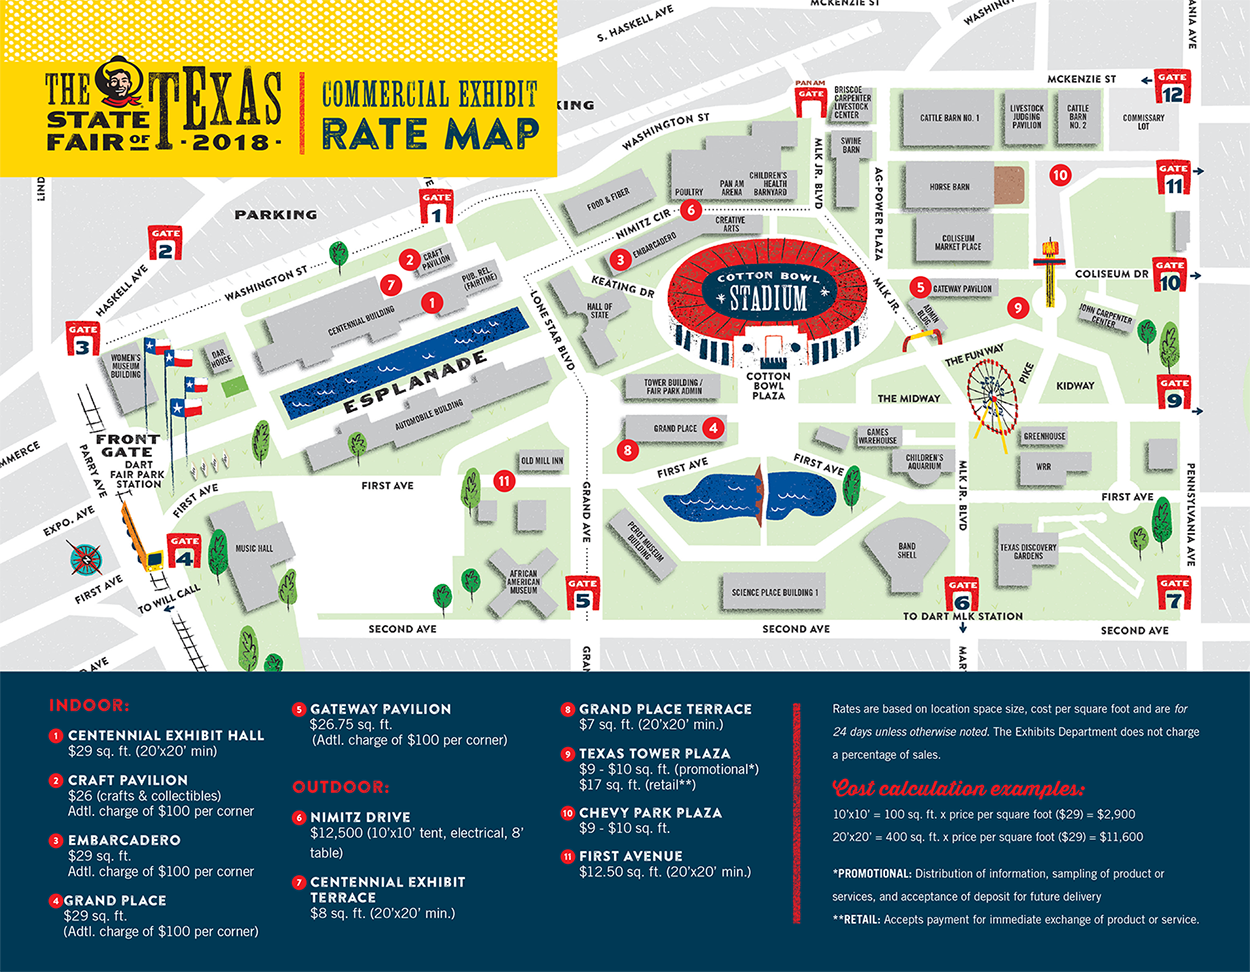 State Fair Texas Map 2018_Exhibitors_Rate Map | State Fair of Texas